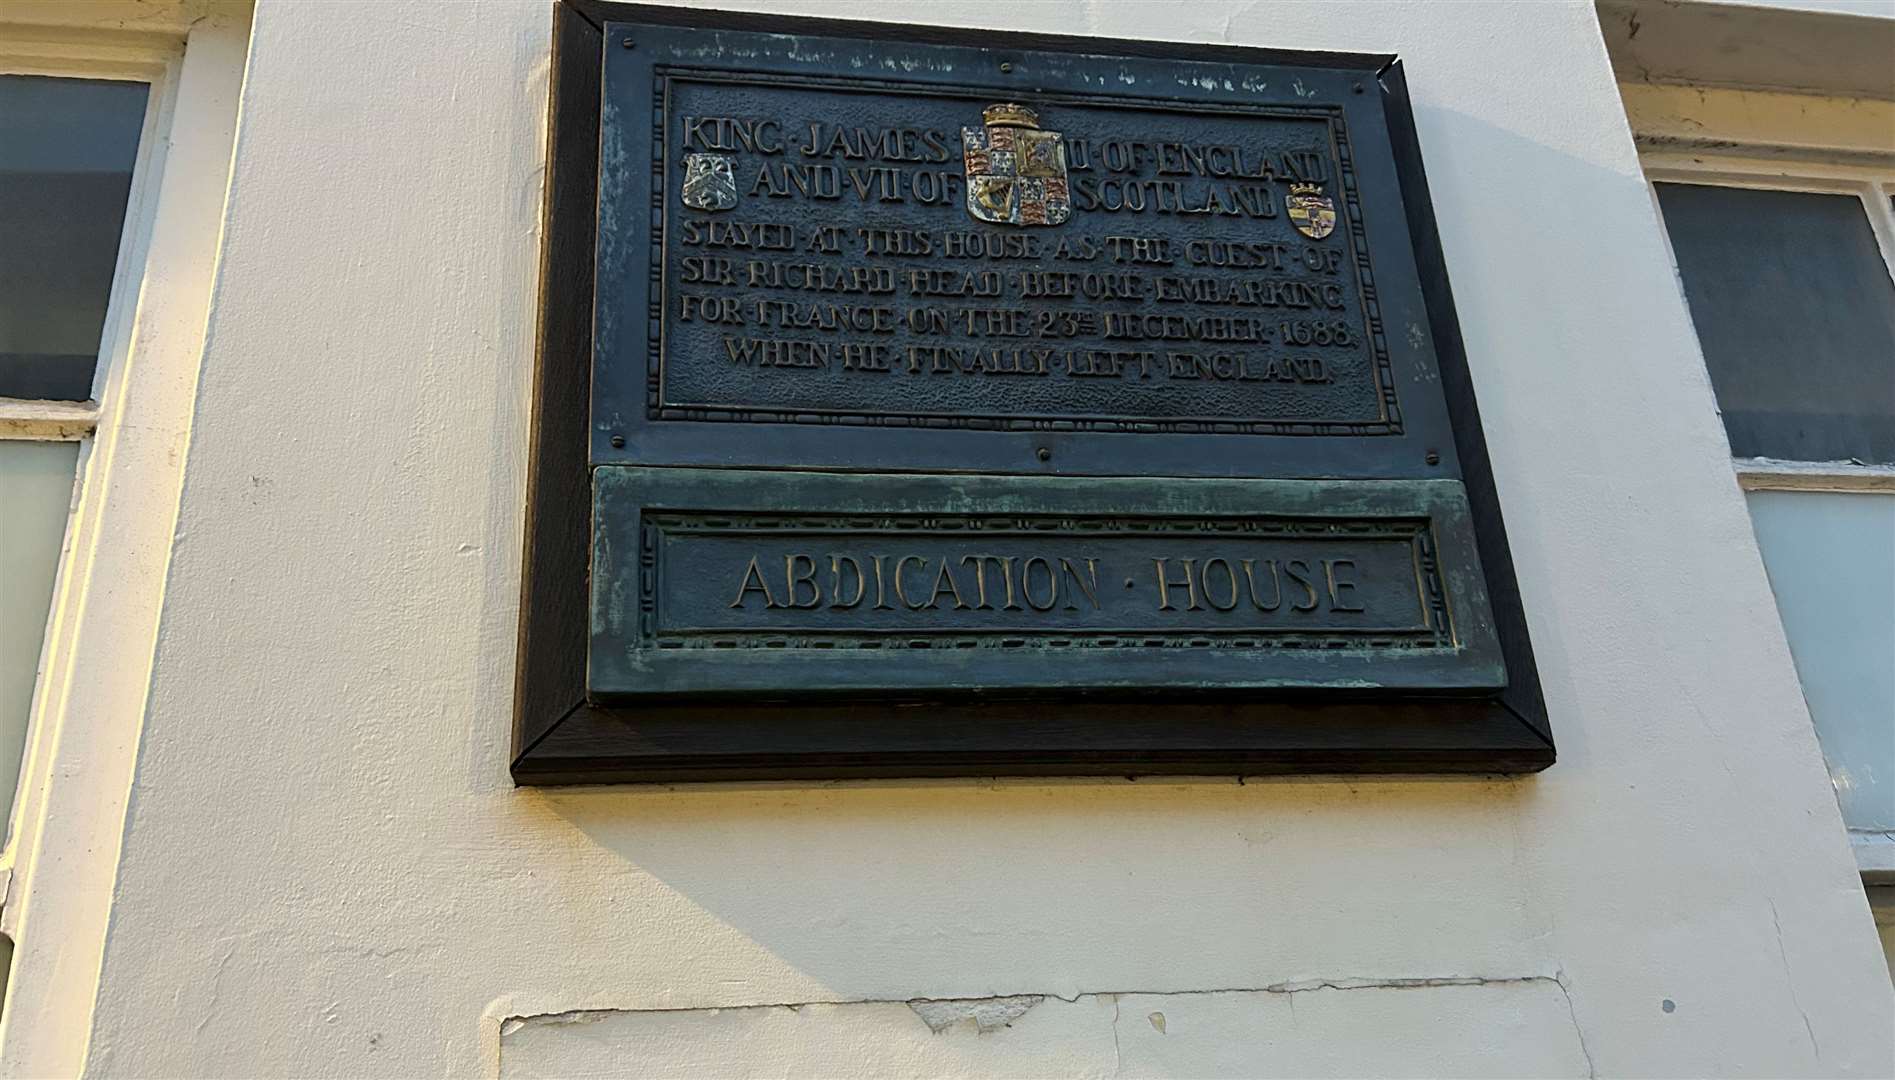 Inscribed plaque outside the historic building where James II once stayed